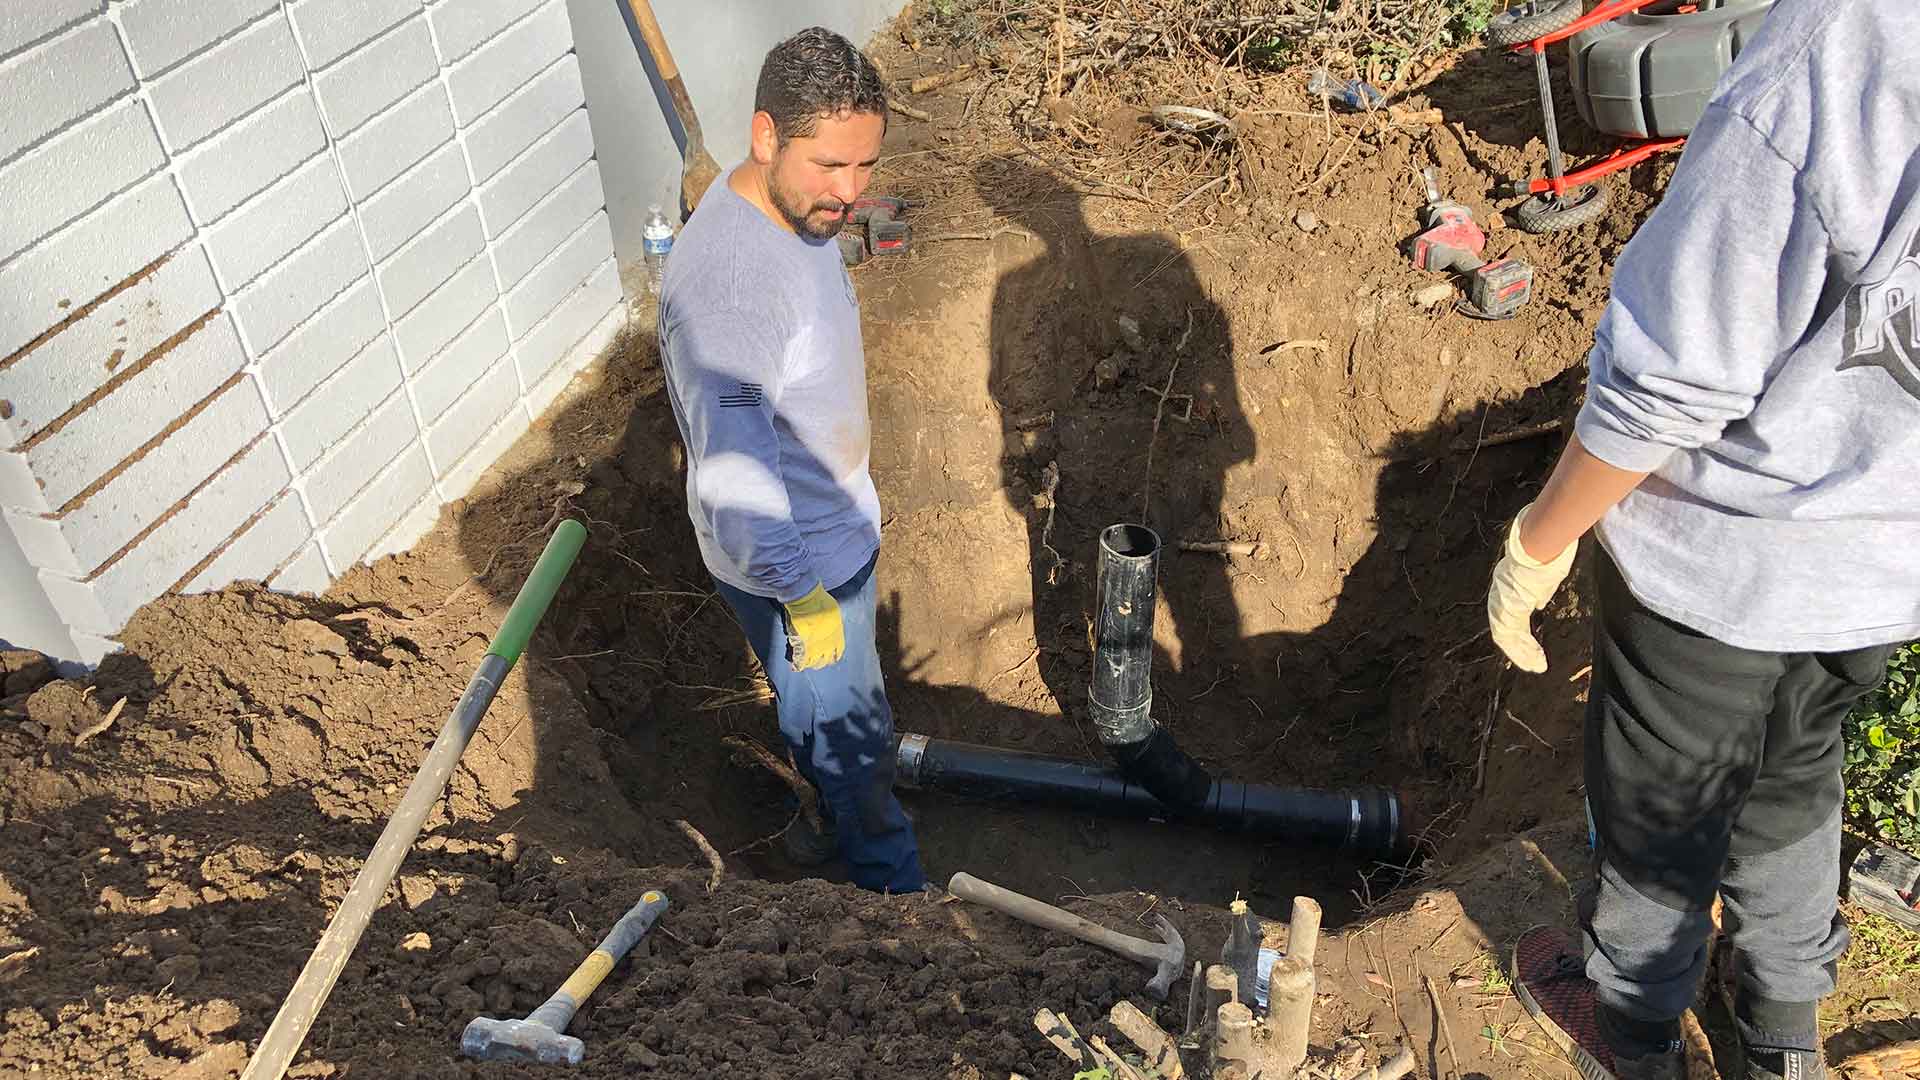 Telltale Signs You Could Have a Broken Sewer Line In Your Home